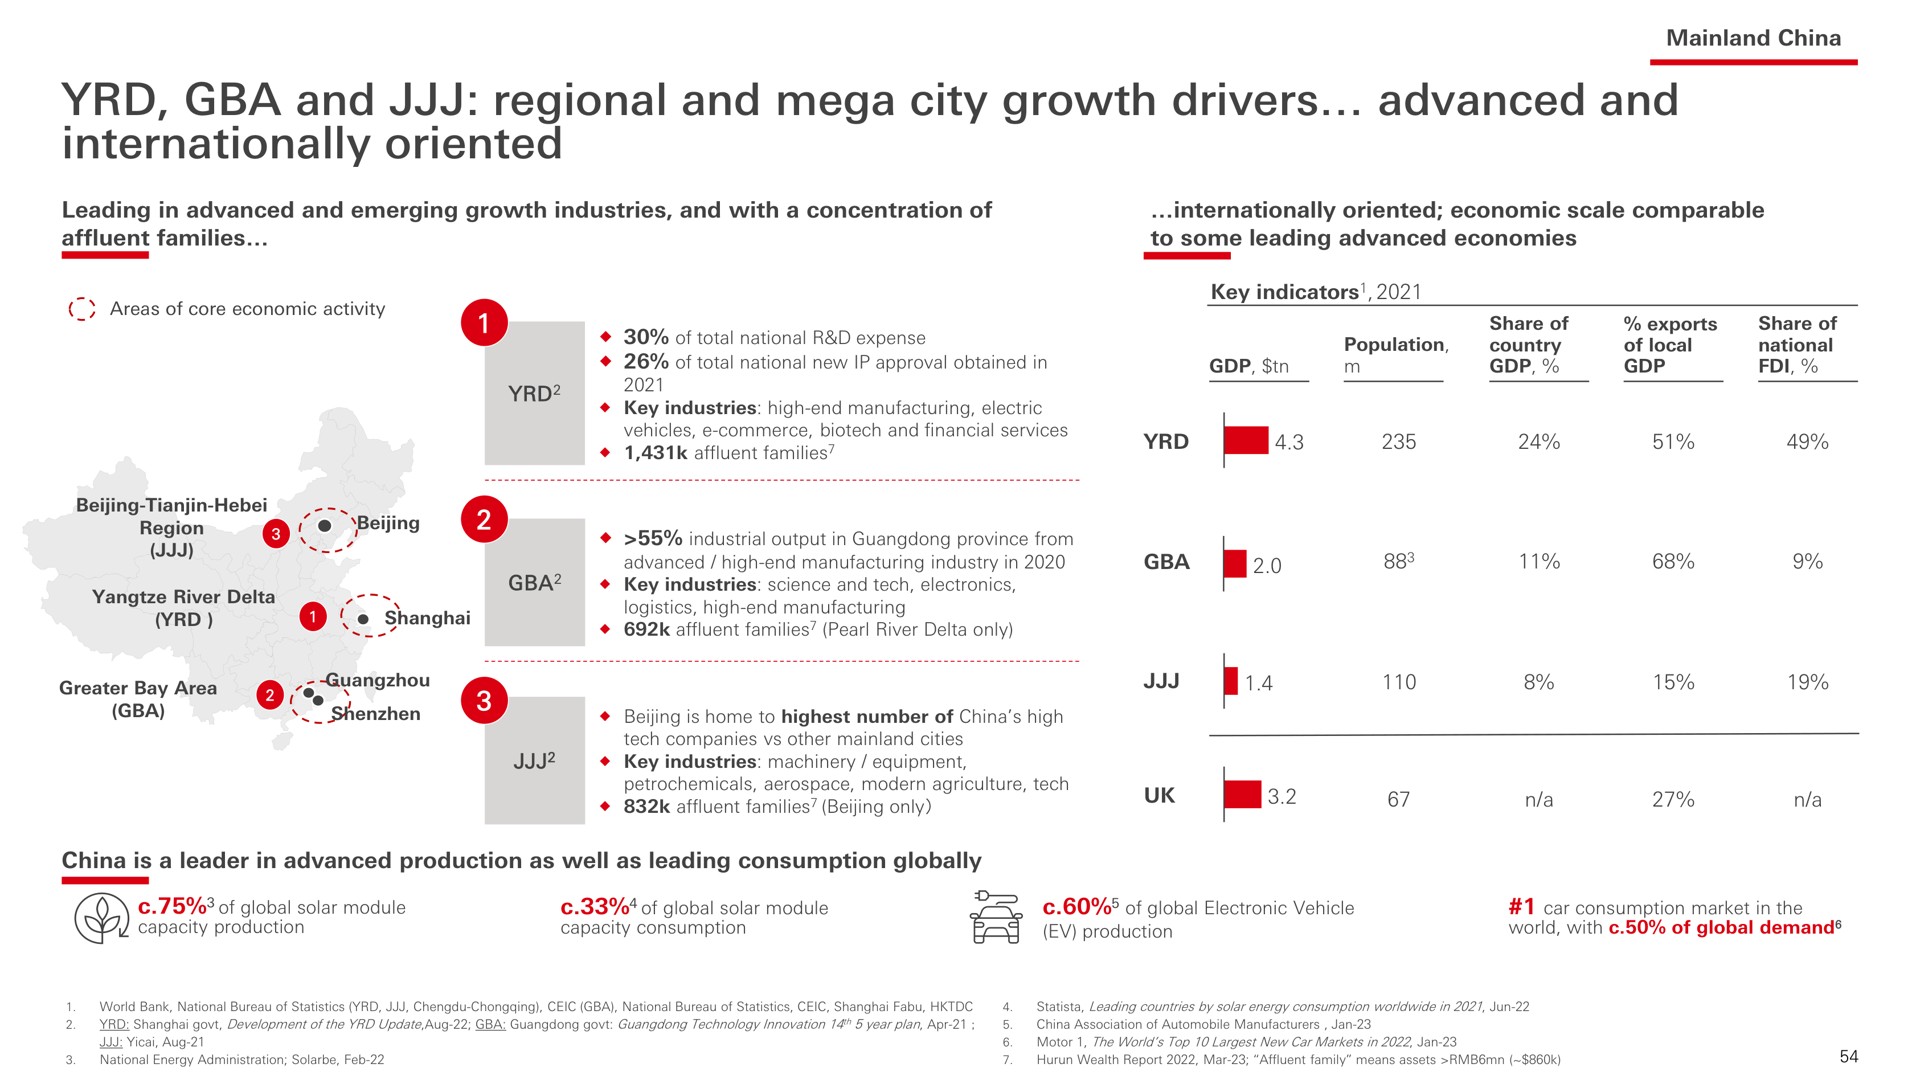 and regional and city growth drivers advanced and internationally oriented | HSBC